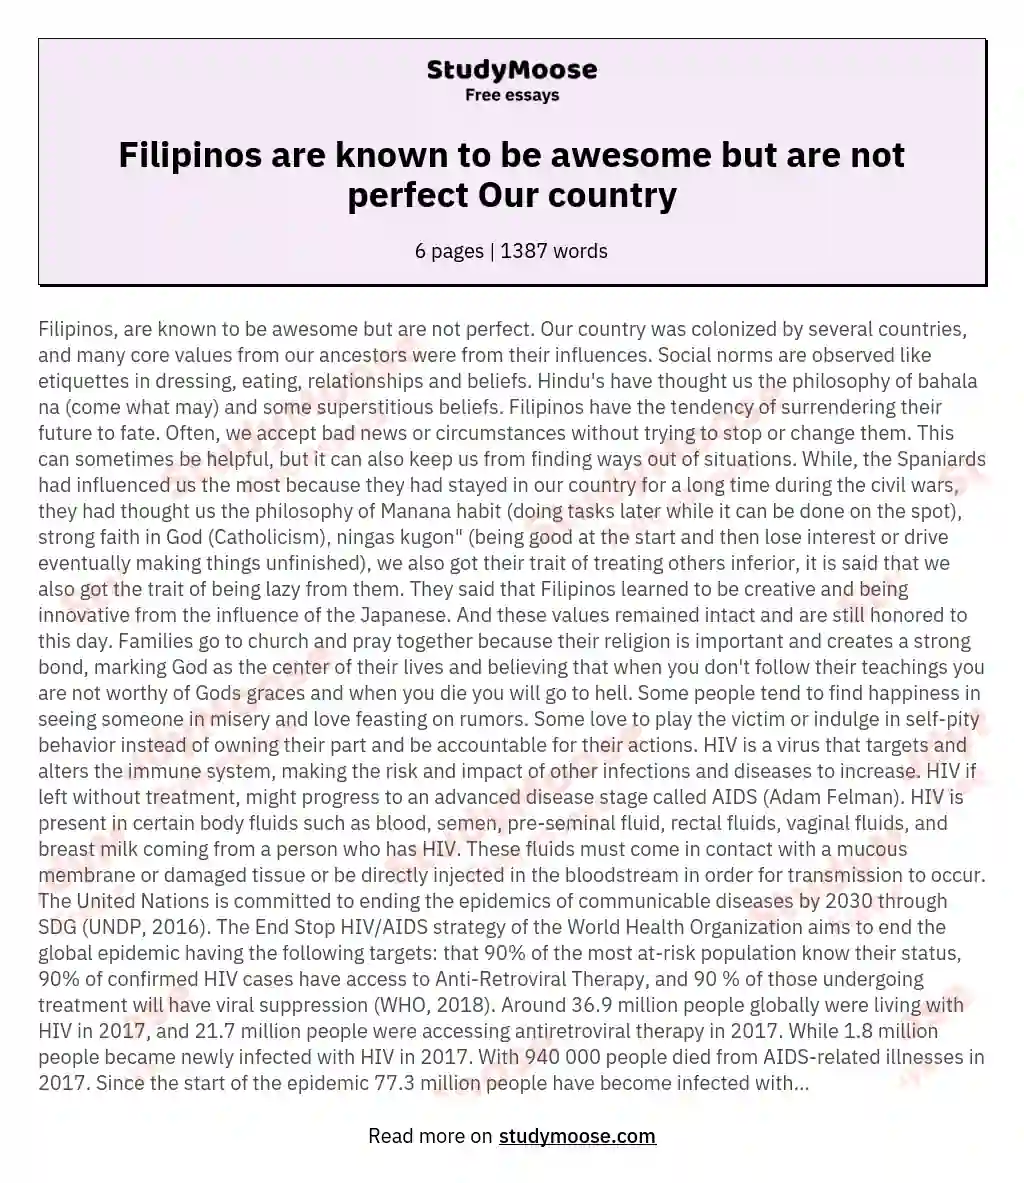 Filipinos are known to be awesome but are not perfect Our country